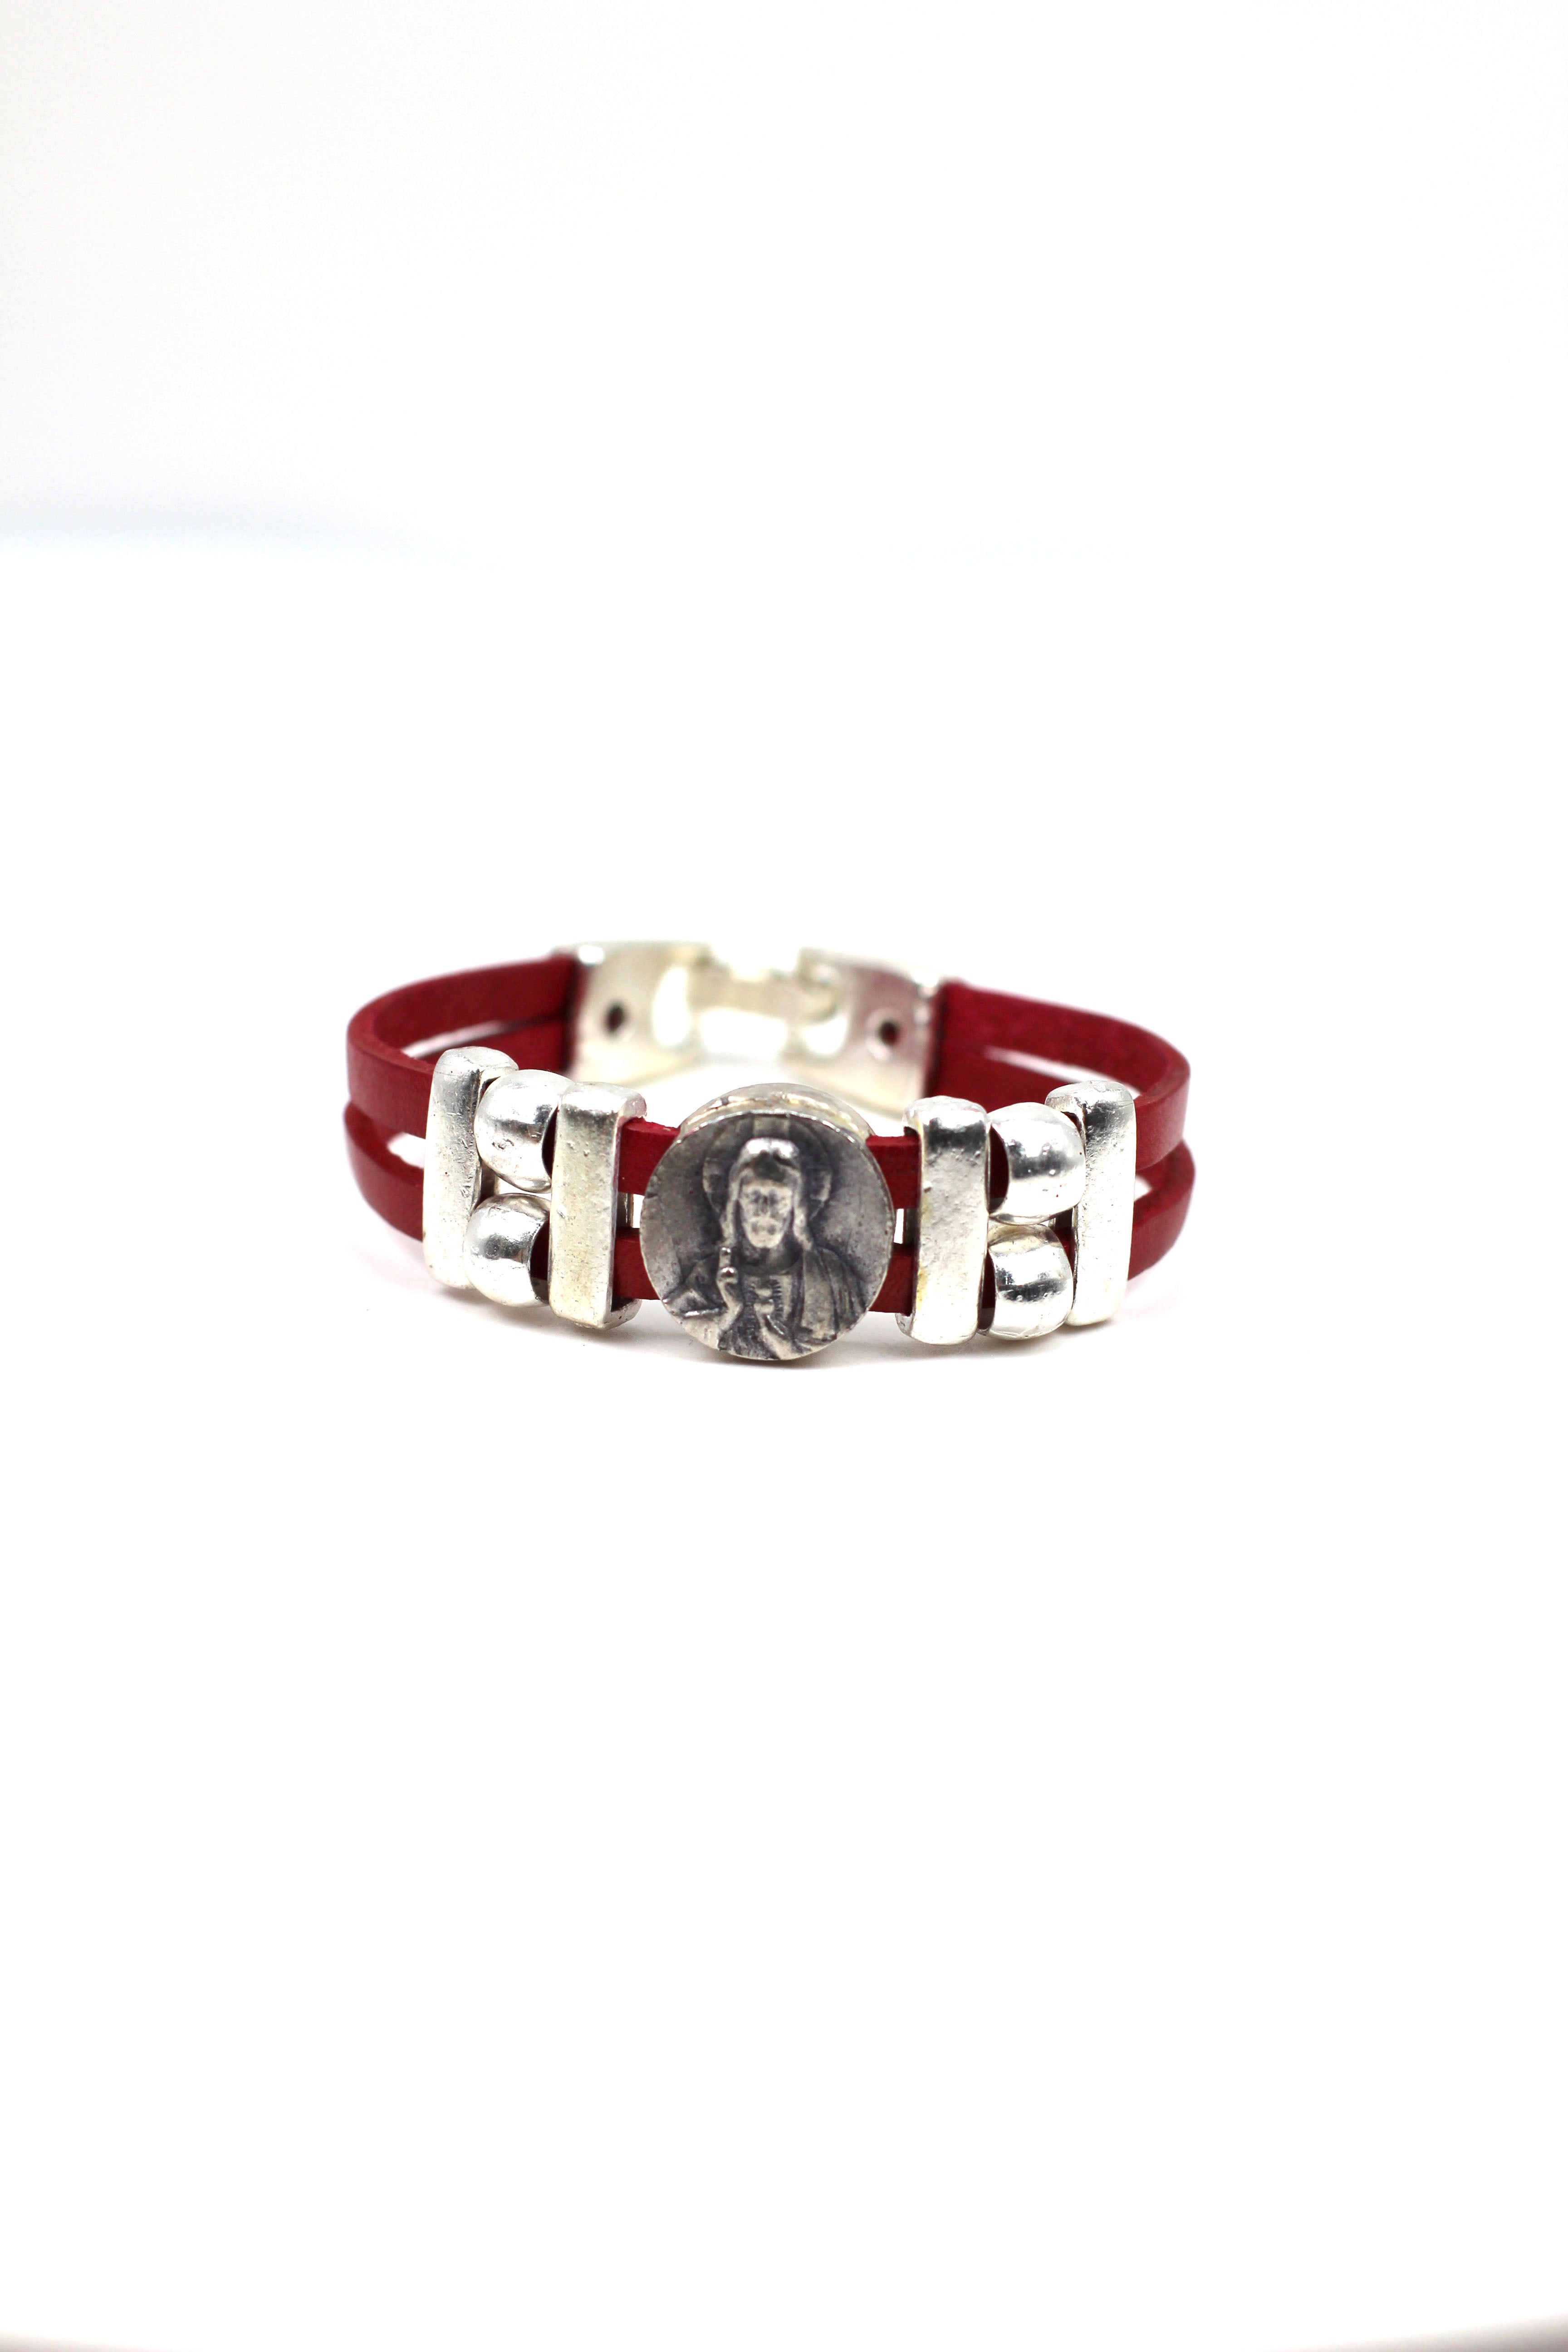 Vintage The Holy Spirit Bracelet handmade jewelry with Leather straps  by Graciela's Collection